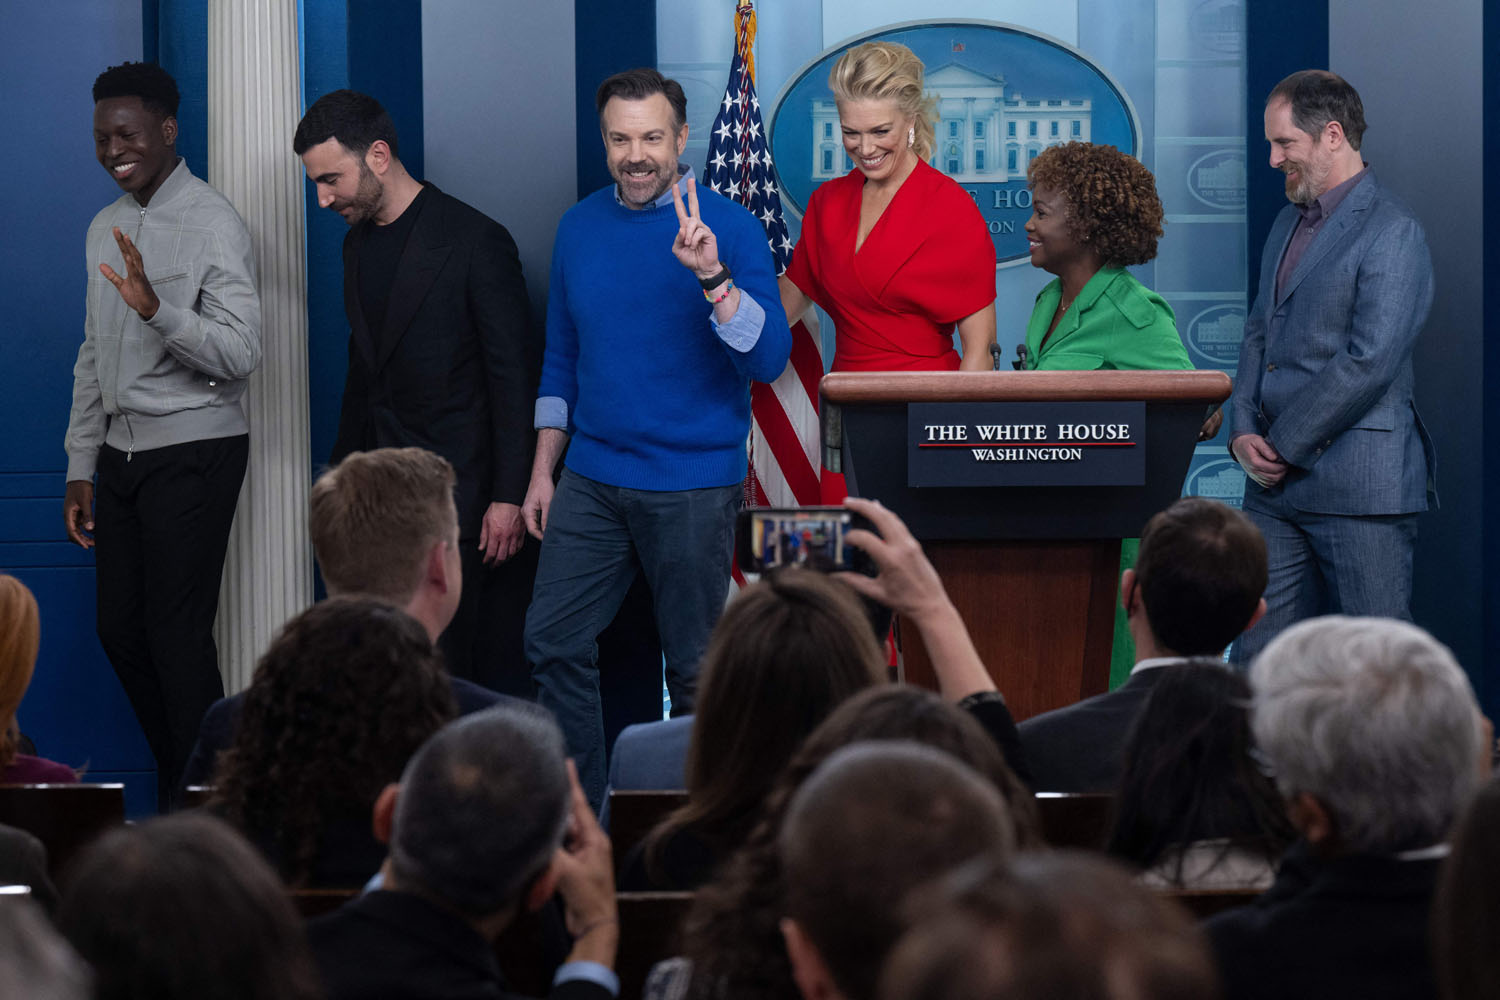 Ted Lasso,' Mental Health Share Center Stage at White House